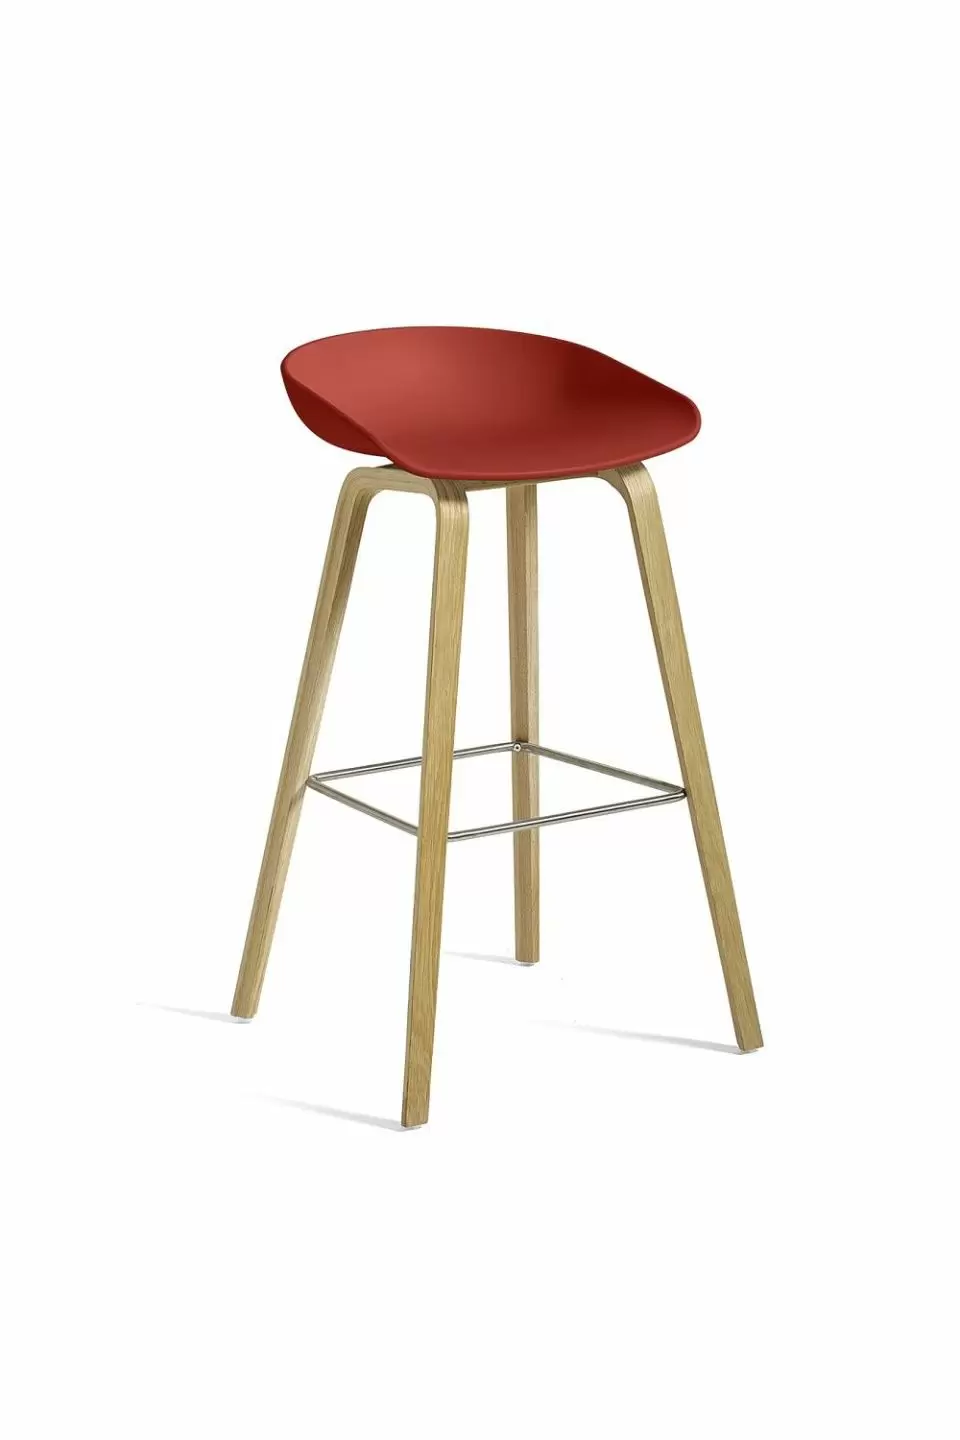 Барный стул About A Stool 32 Warm Red Oak Base h75